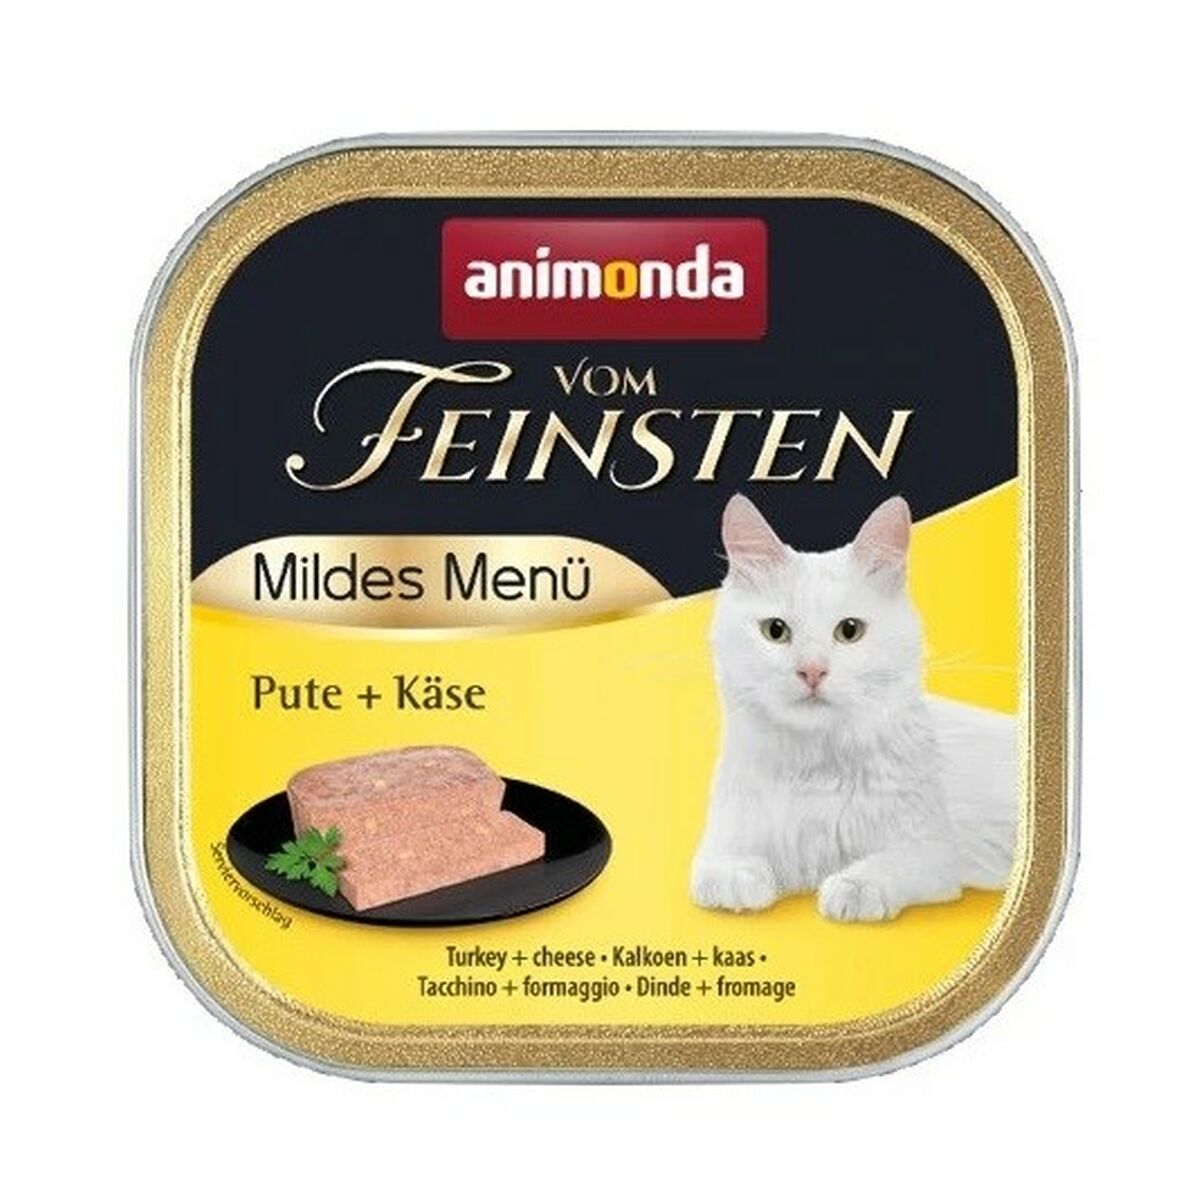 Aliments pour chat Animonda Vom Feinsten Fromage Dinde